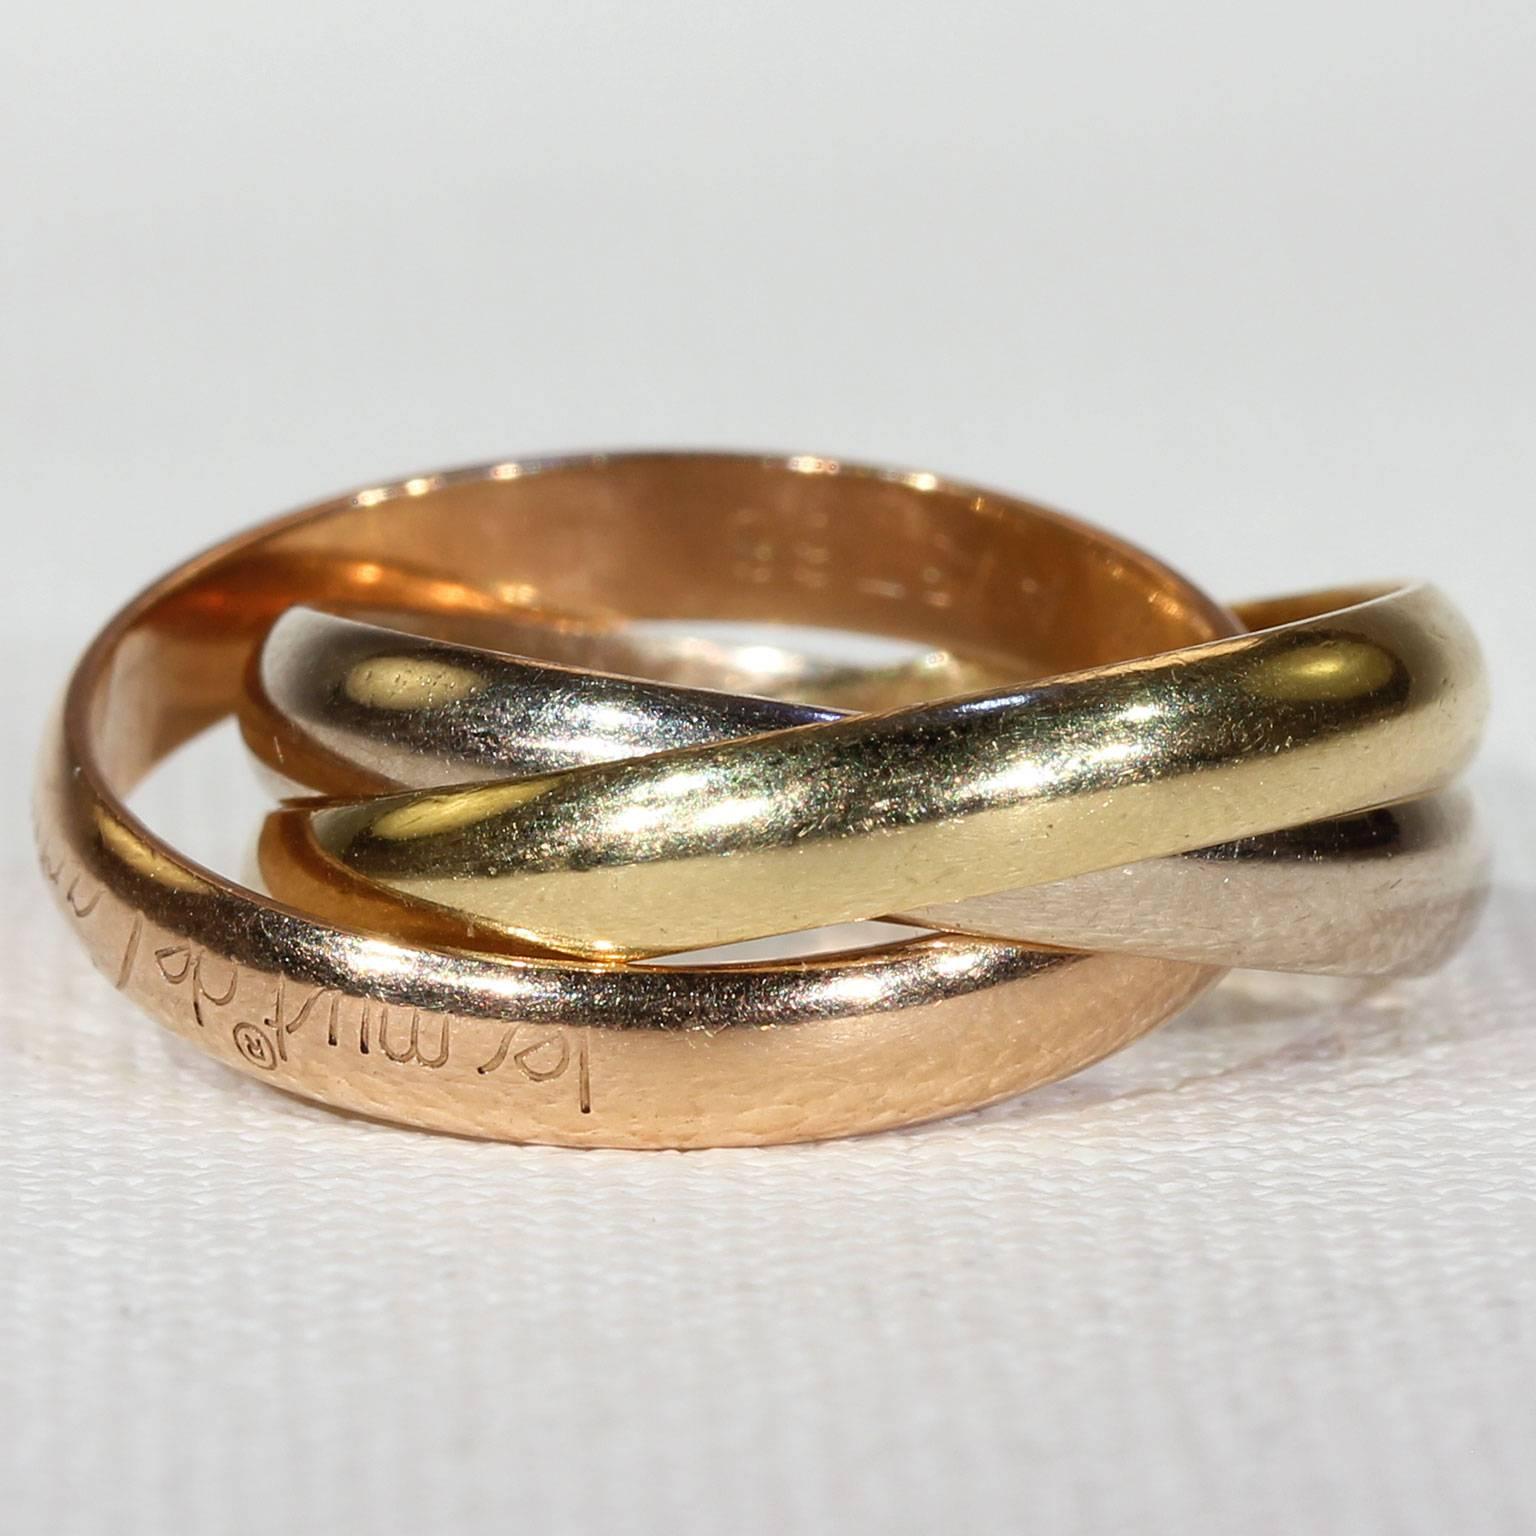 The Trinity Ring was designed by Louis Cartier, the grandson of Cartier’s founder, in 1924, with the help of his dear friend and famous French poet, Jean Cocteau. The ring features three interlaced gold bands in pink, yellow, and white, representing